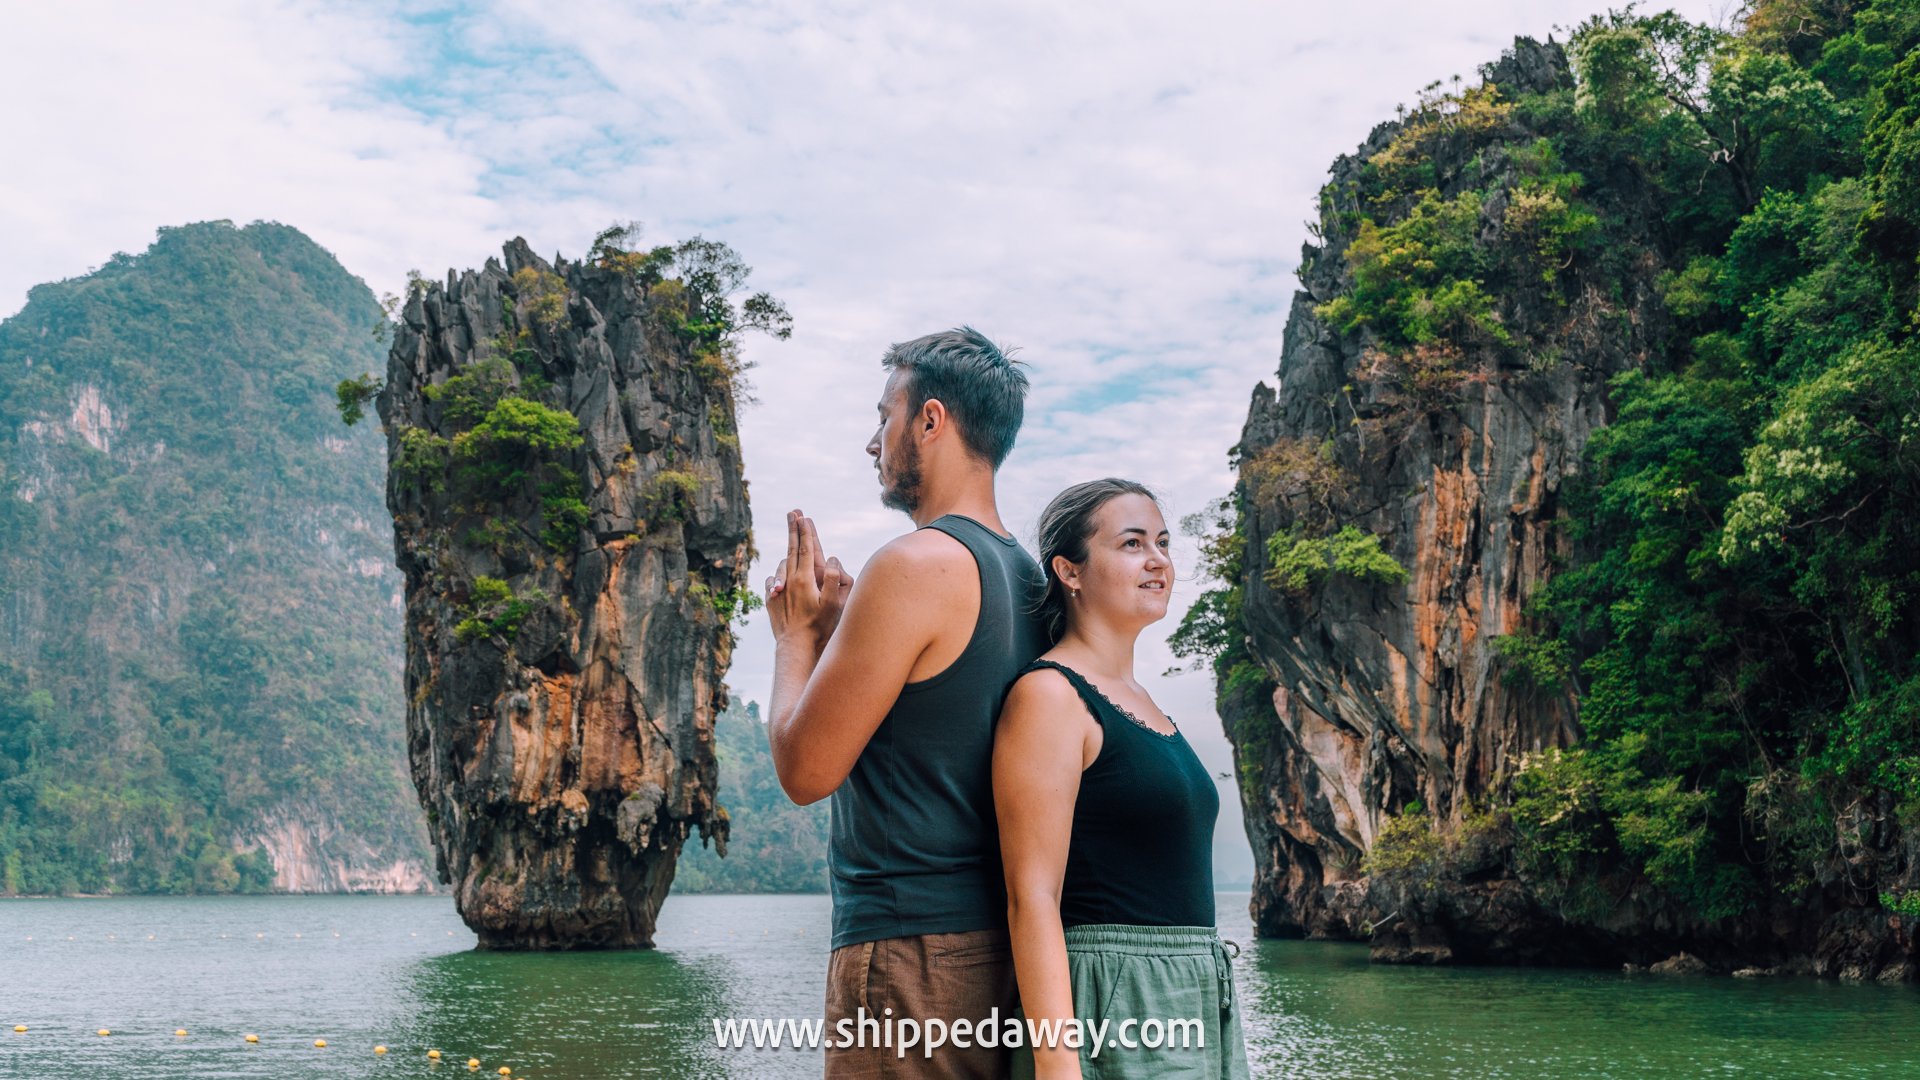 James Bond Island, a top thing to do in Phuket, Thailand